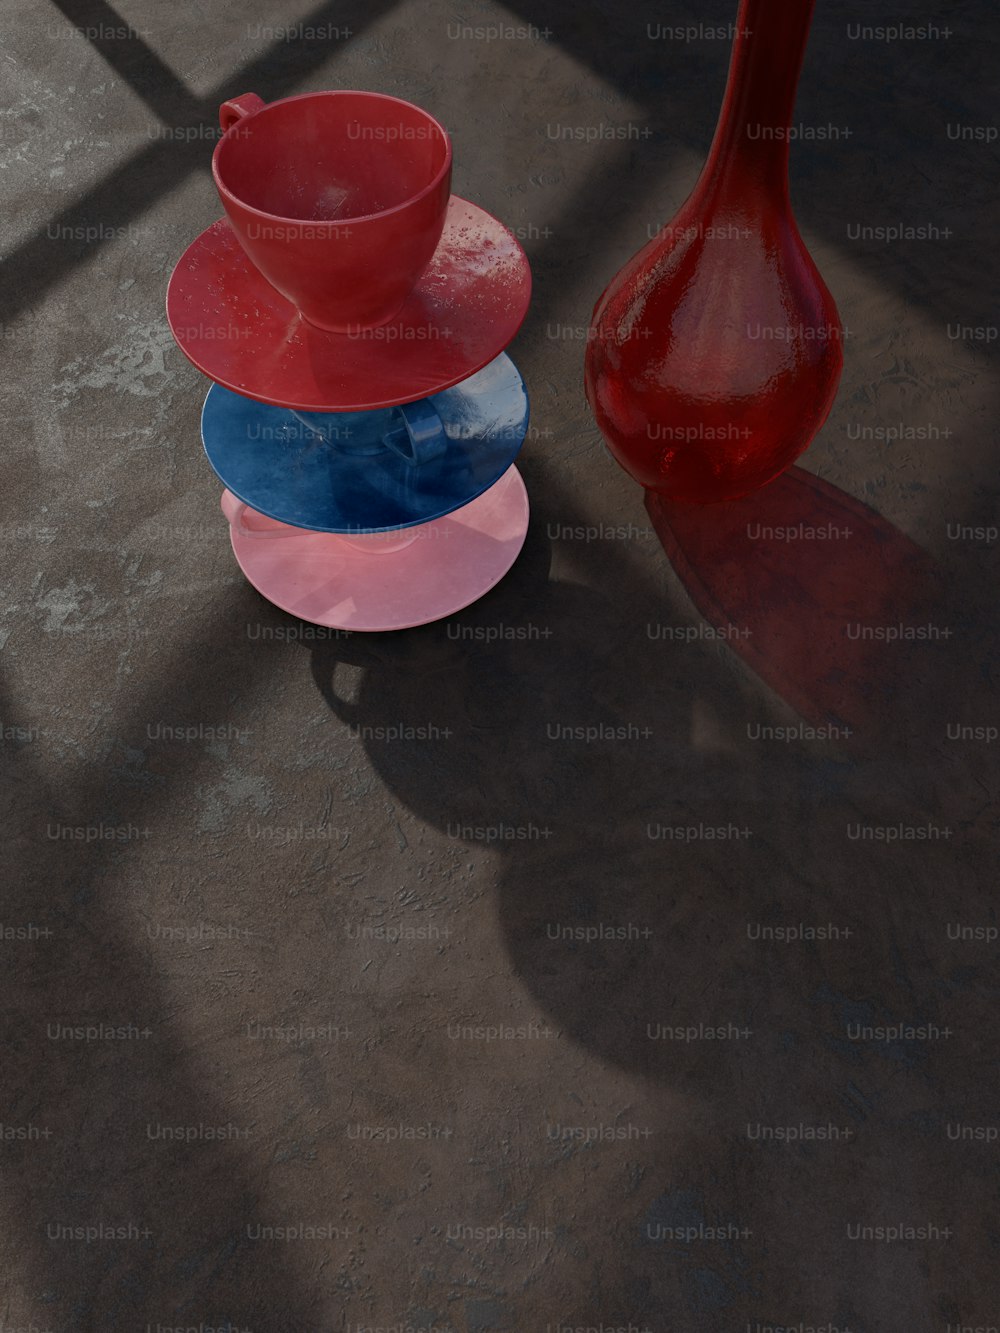 a red vase sitting next to a stack of plates